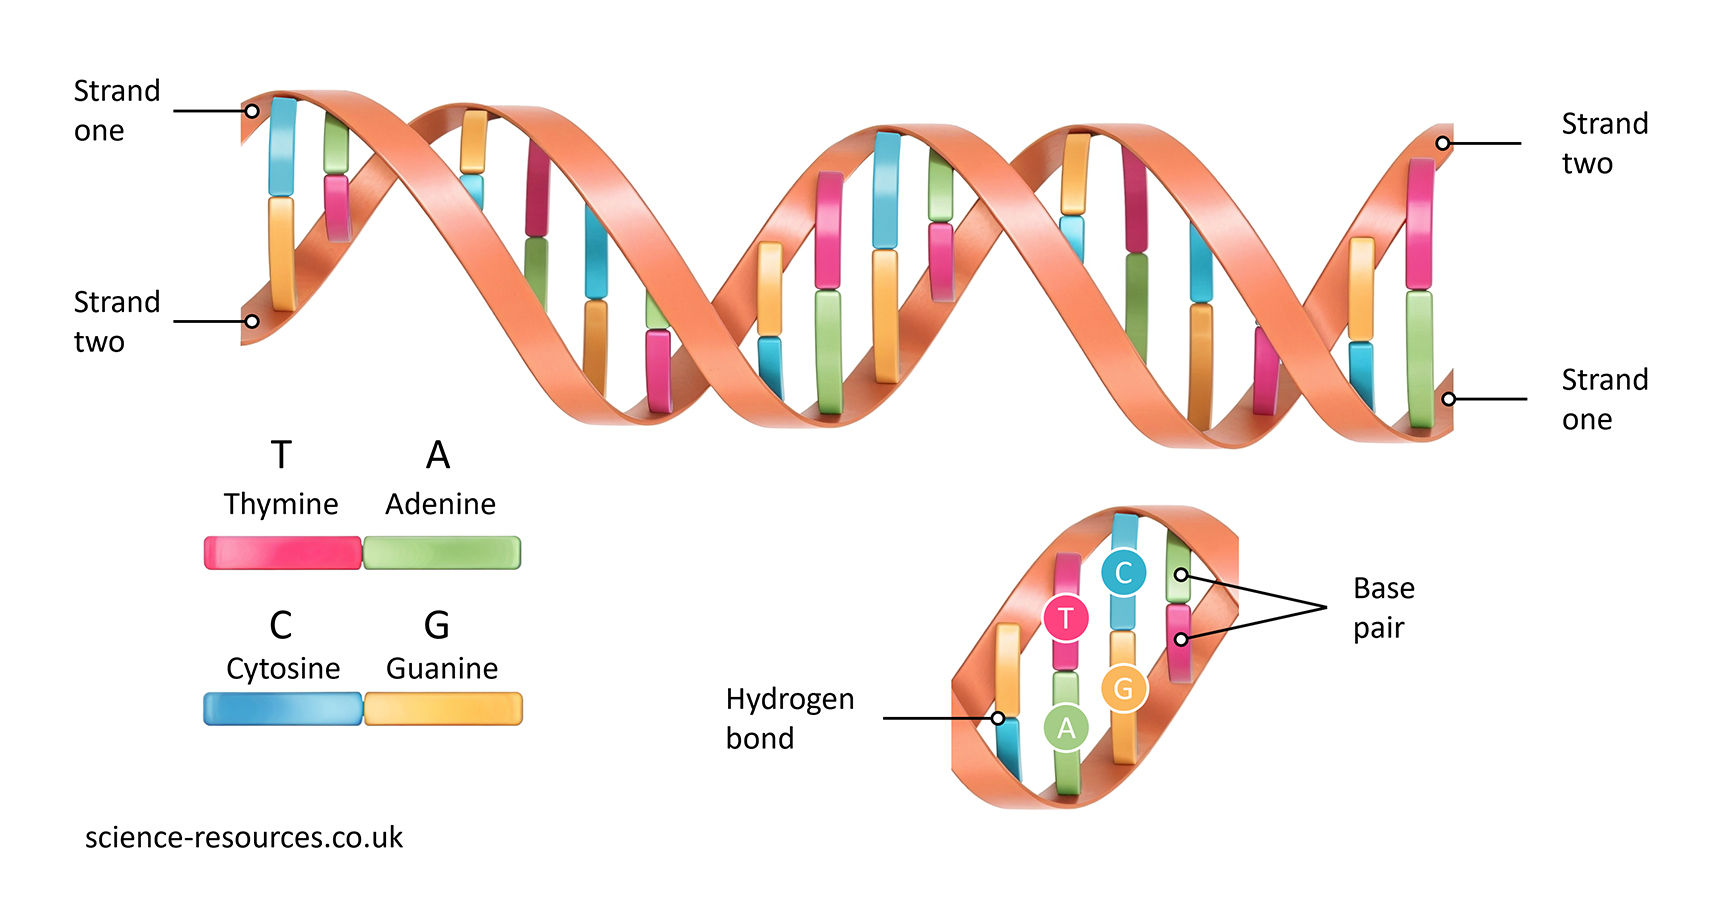 This image is a diagram illustrating the structure of DNA, showing its double helix formation, base pairs, and hydrogen bonds.